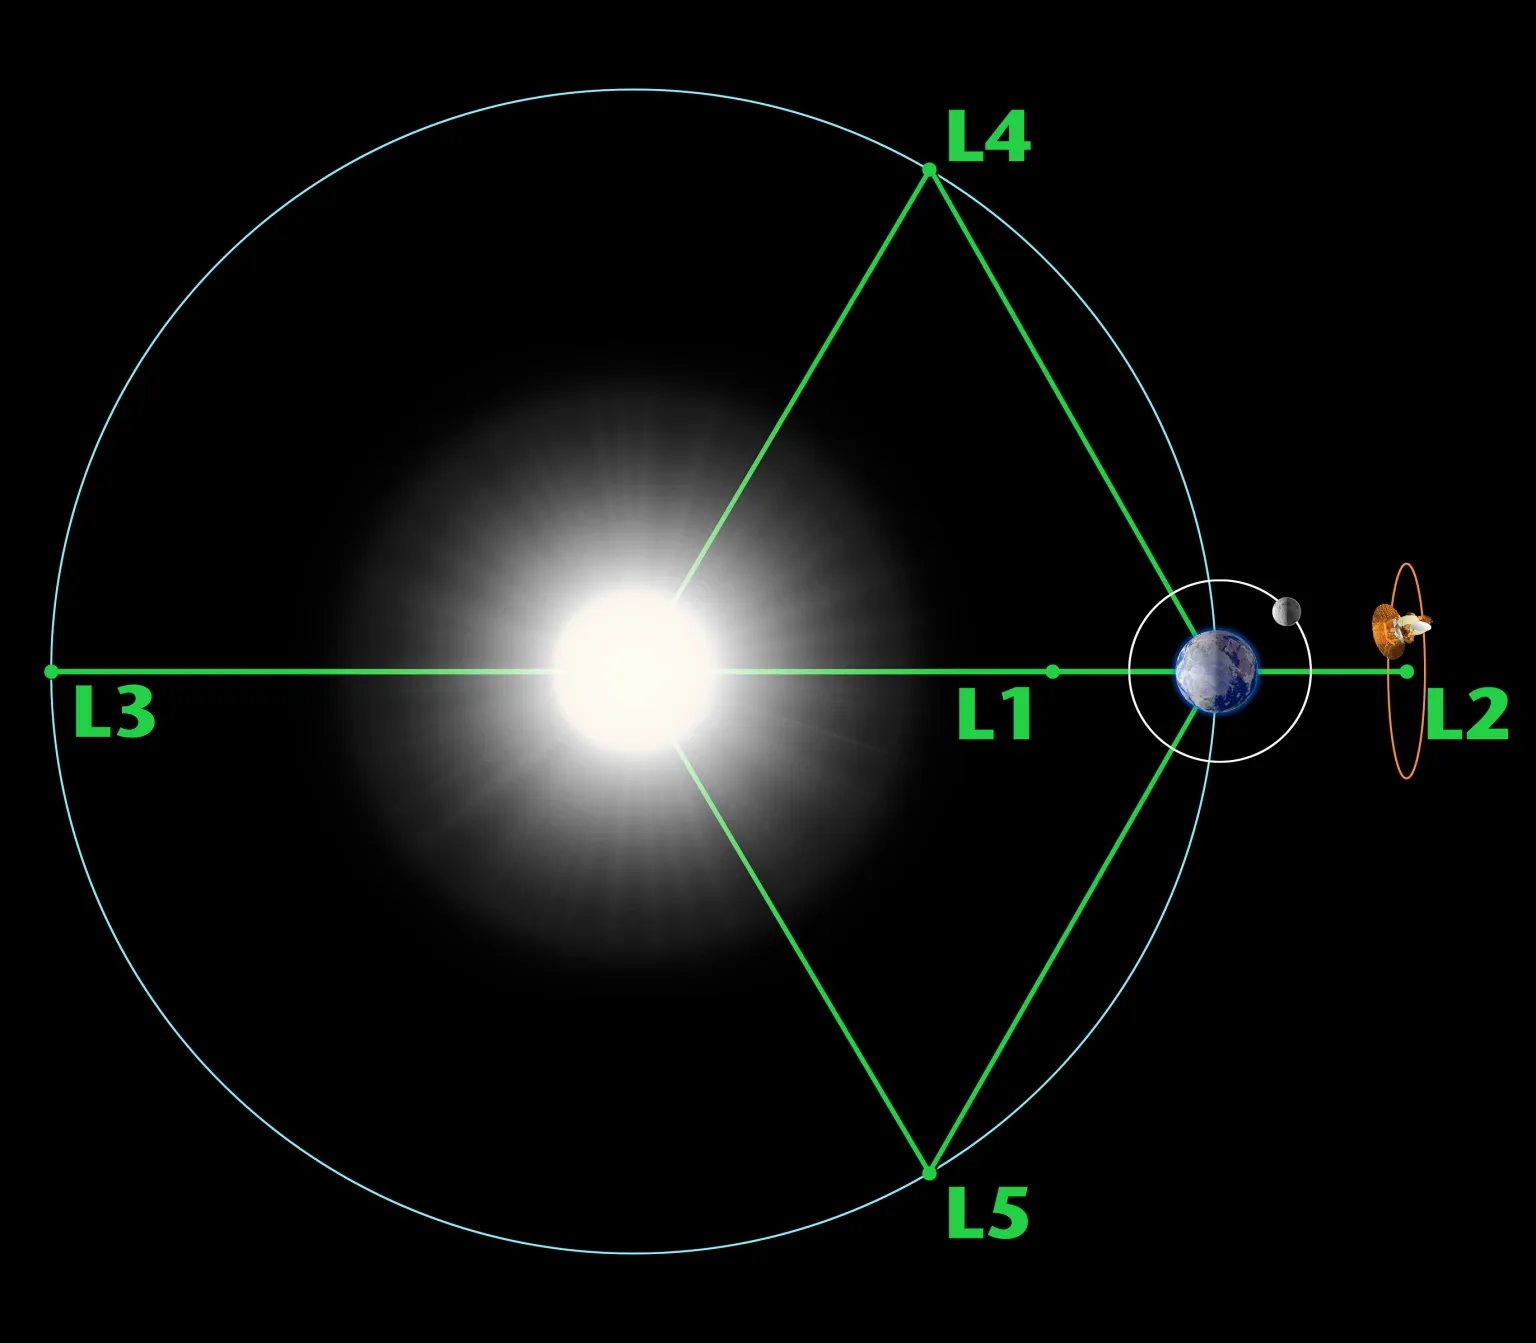 A diagram showing the orbit of the Earth around the Sun, and the lagrange points between the two bodies.